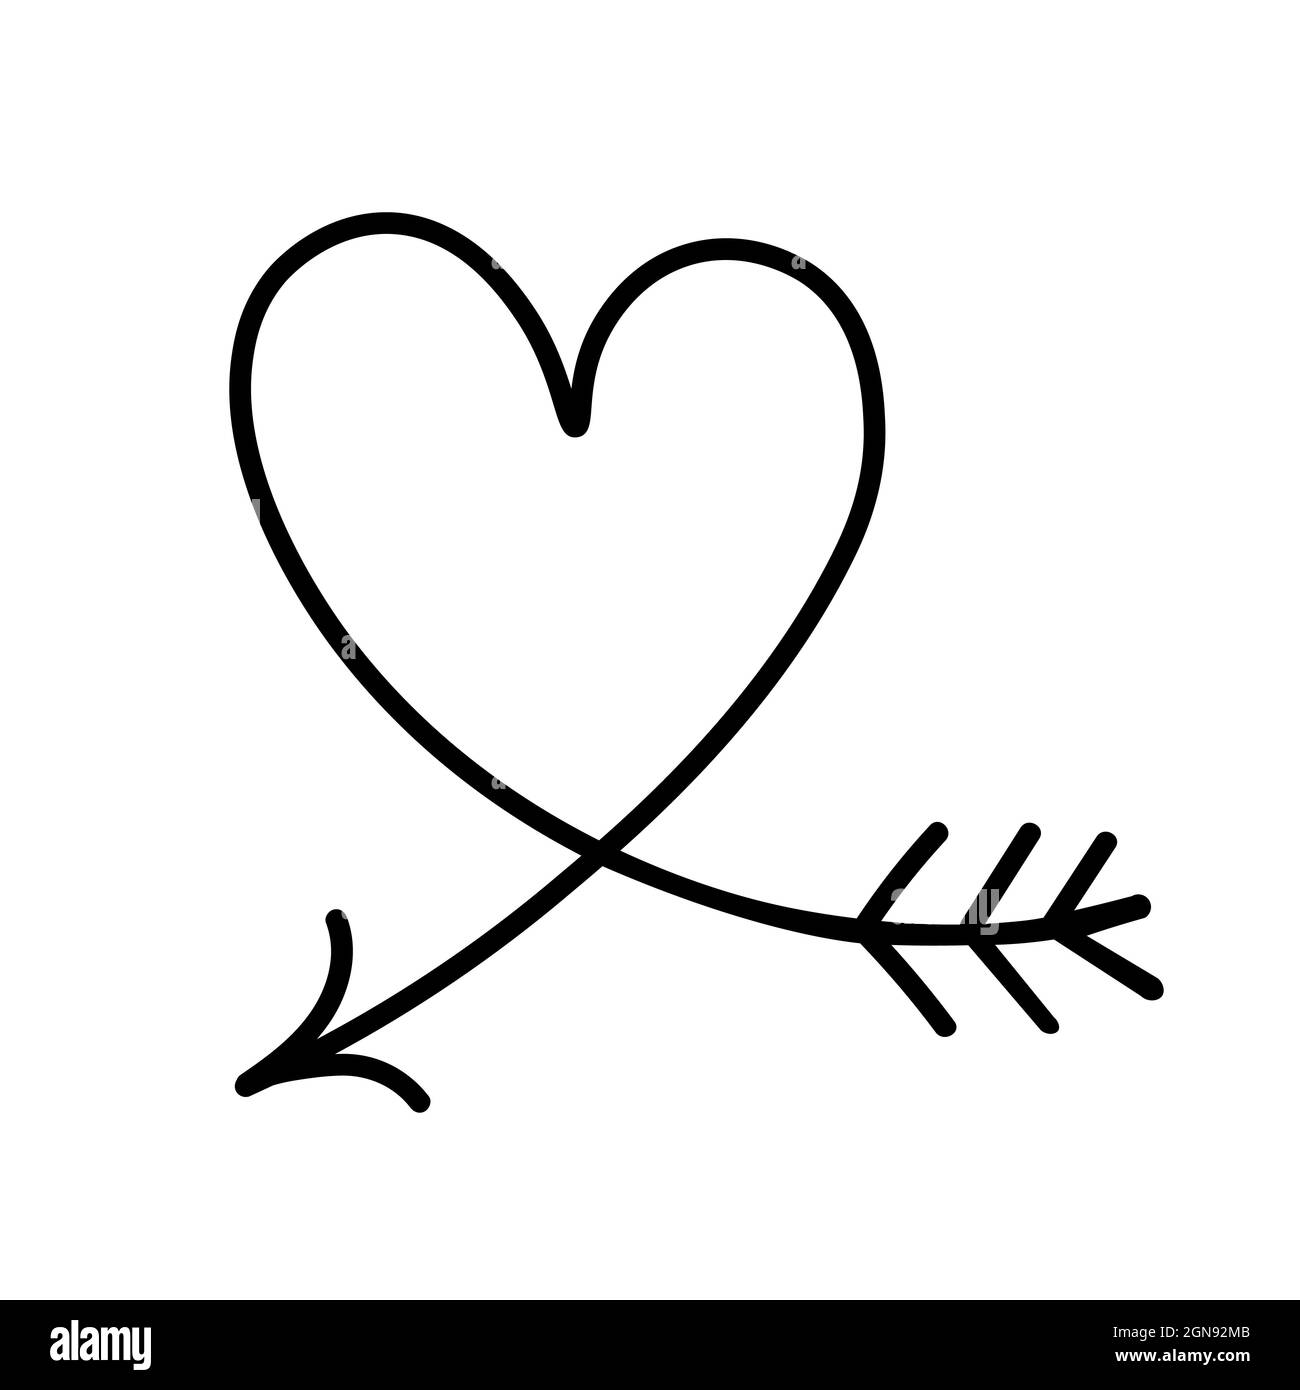 Love heart arrow Black and White Stock Photos & Images - Alamy